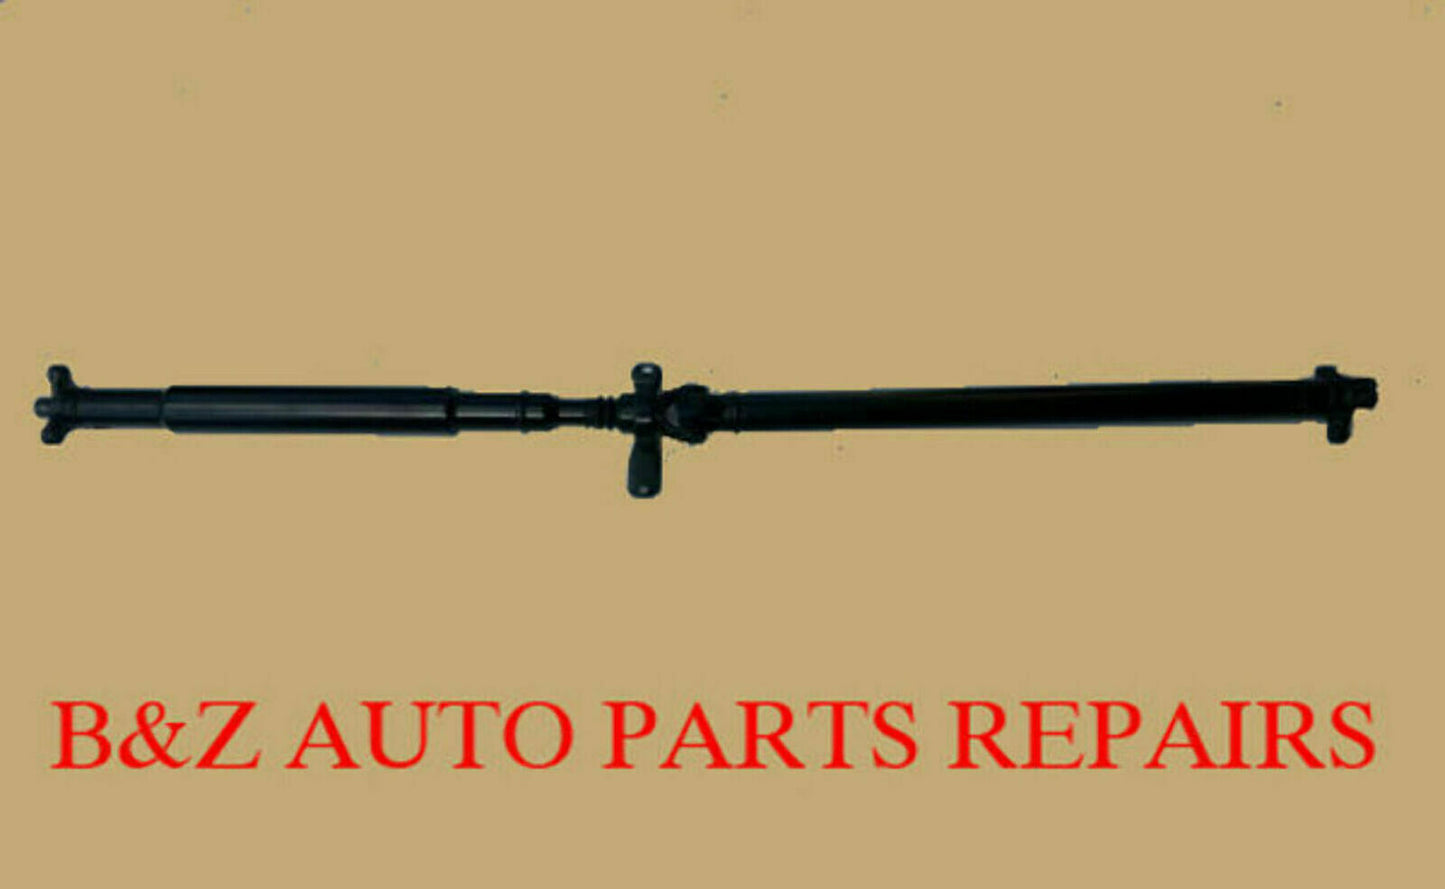 2010 Holden Commodore VE 6 Speed Auto 3L Wagon Reconditioned Tailshaft | B & Z Tailshafts